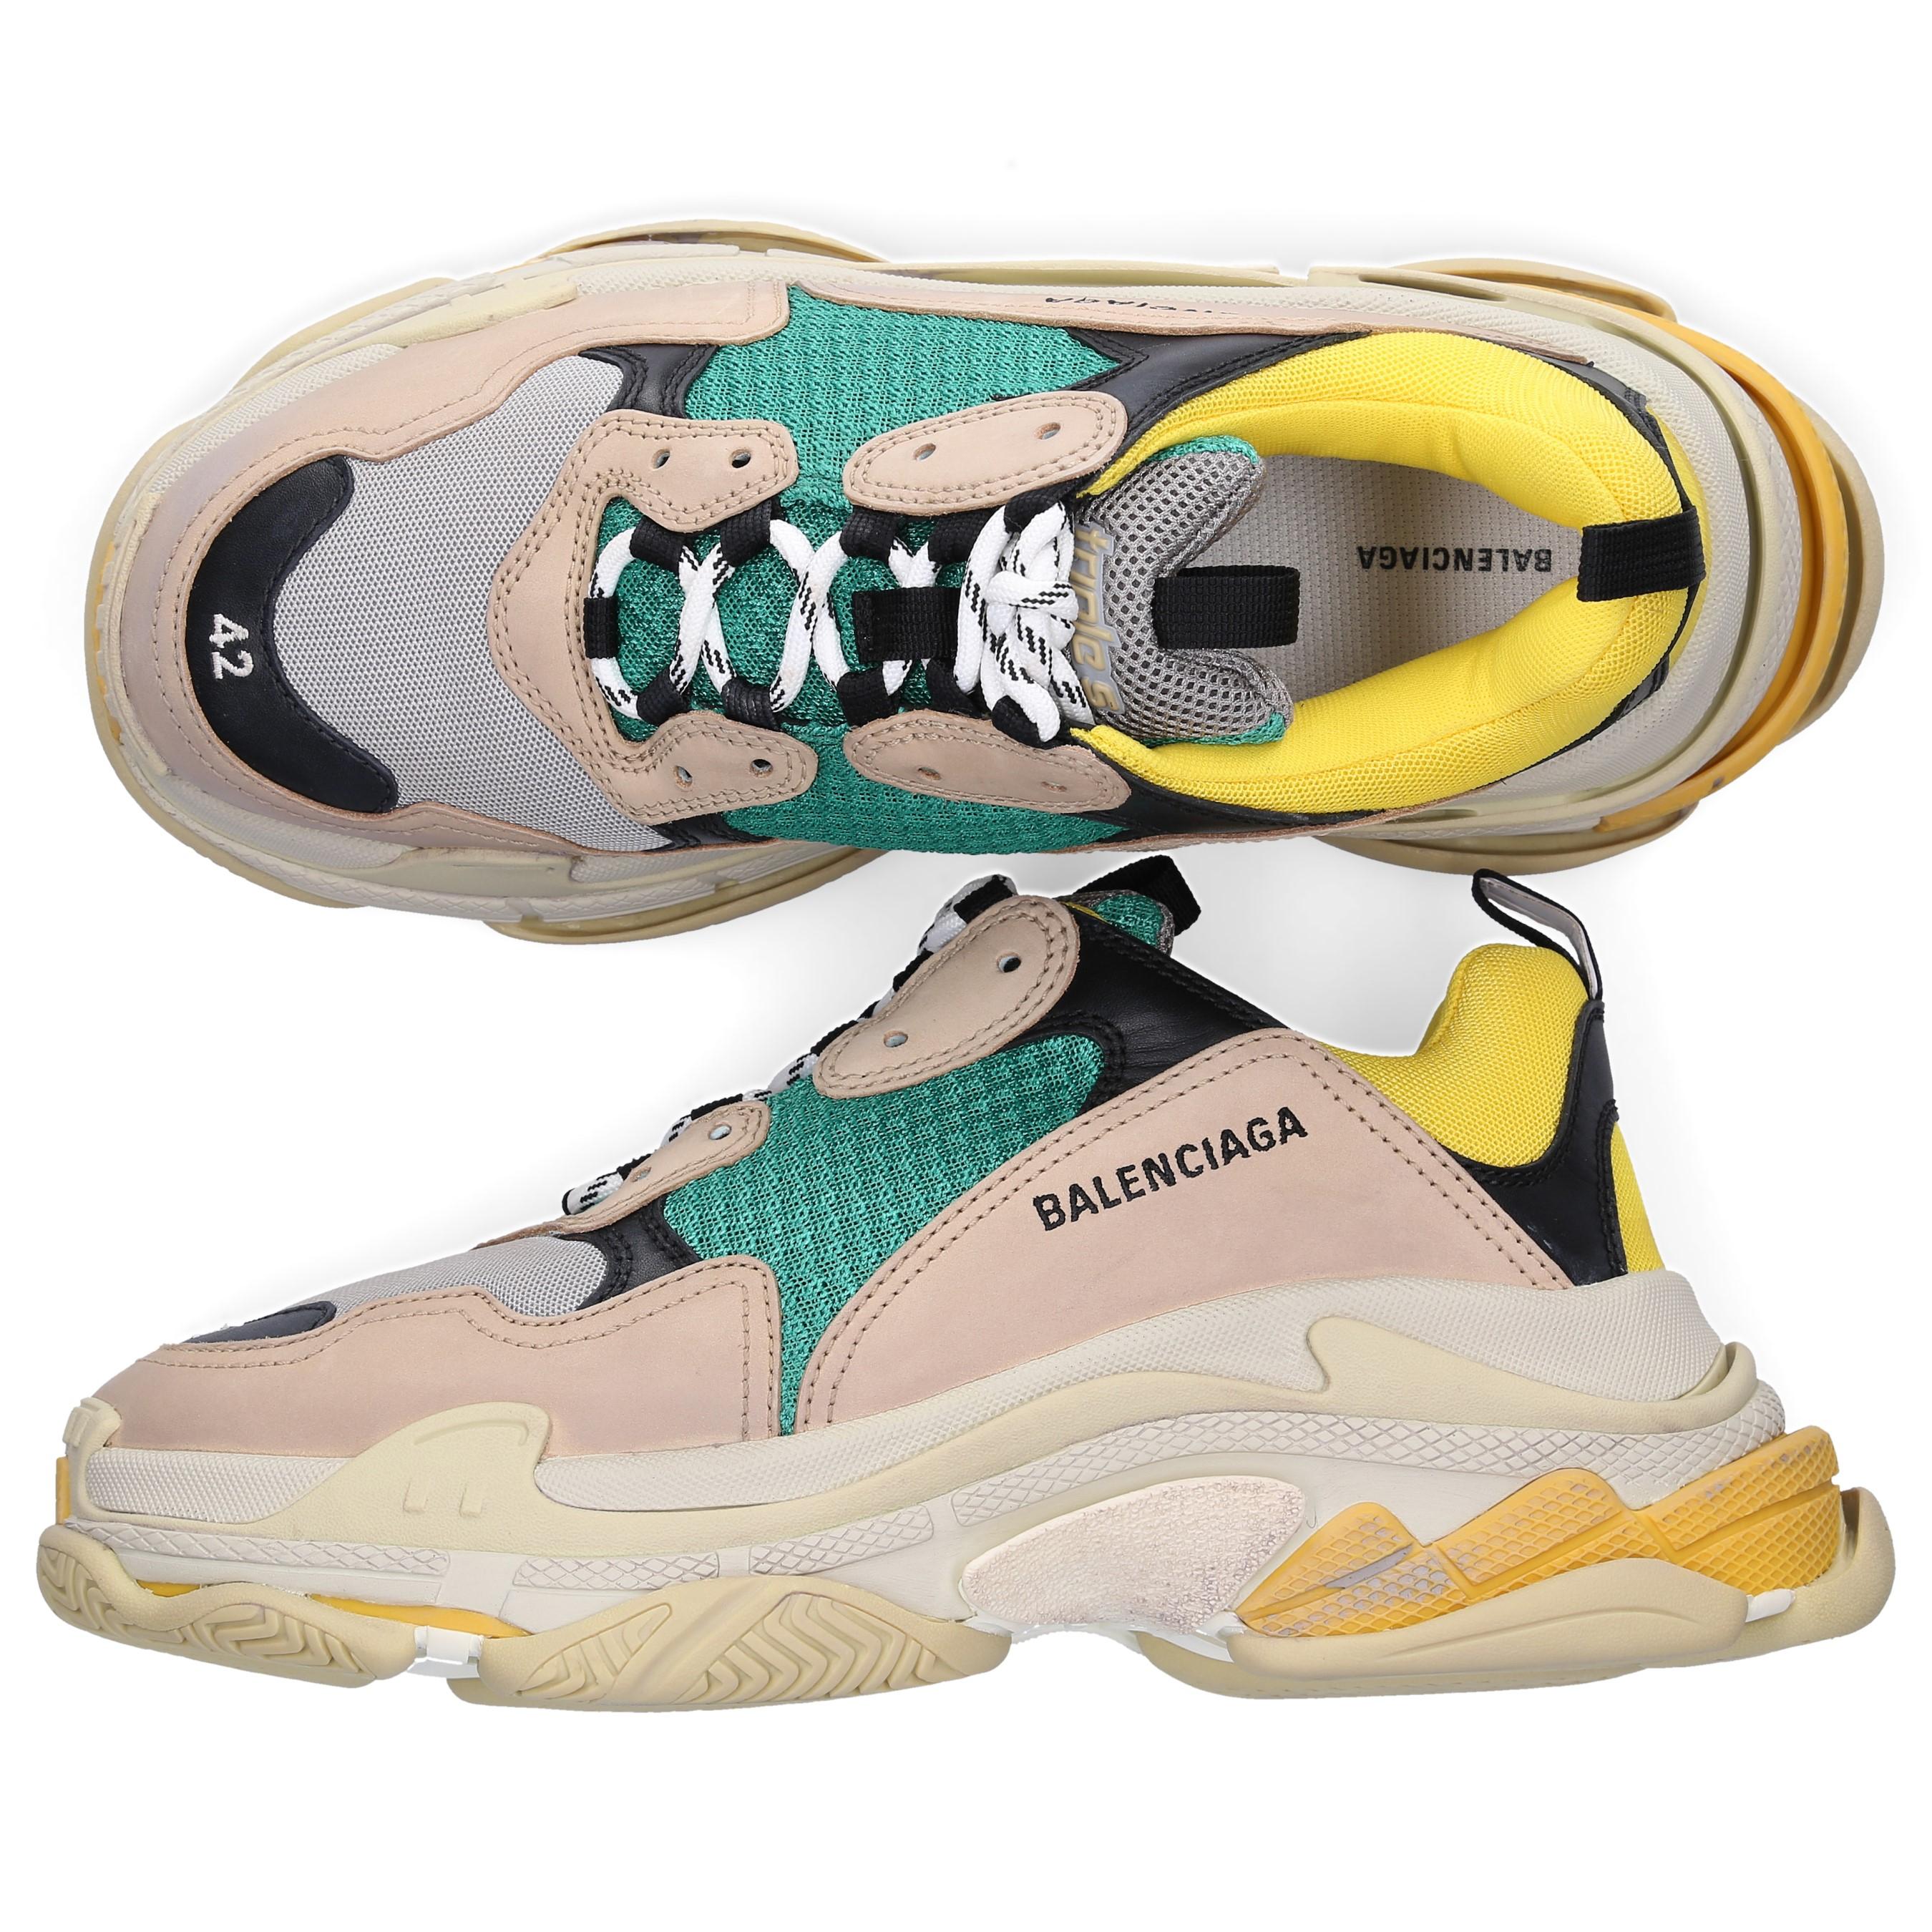 Balenciaga Leather Sneakers Beige Triple S in Natural for Men - Lyst